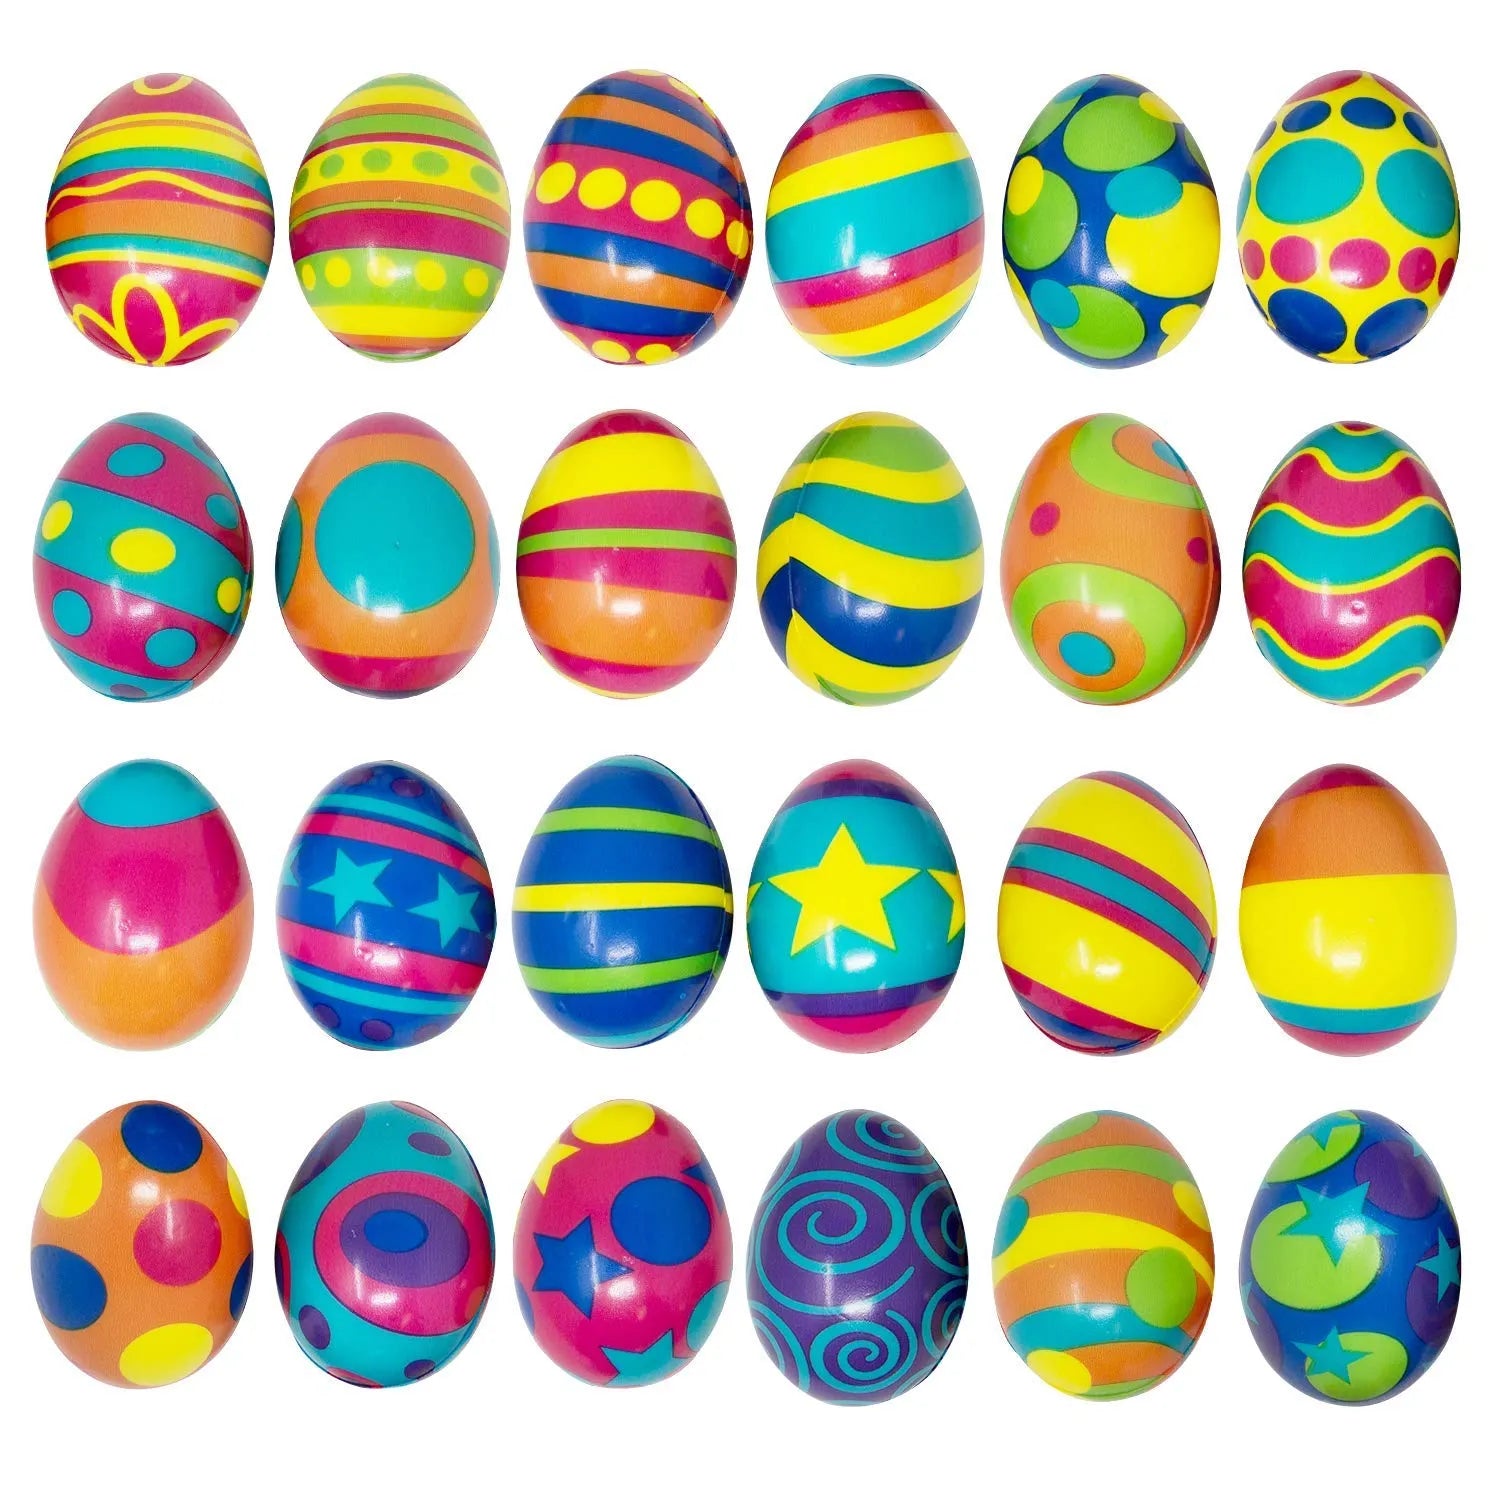  JOYIN 24 PCS Colorful and Squishy Toy Eggs for Easter Eggs  Hunt, Slow Rising Stress Relief Super Soft Squeeze Easter Eggs, Easter  Basket Stuffer, Assorted Colors, Party Favors : Toys 